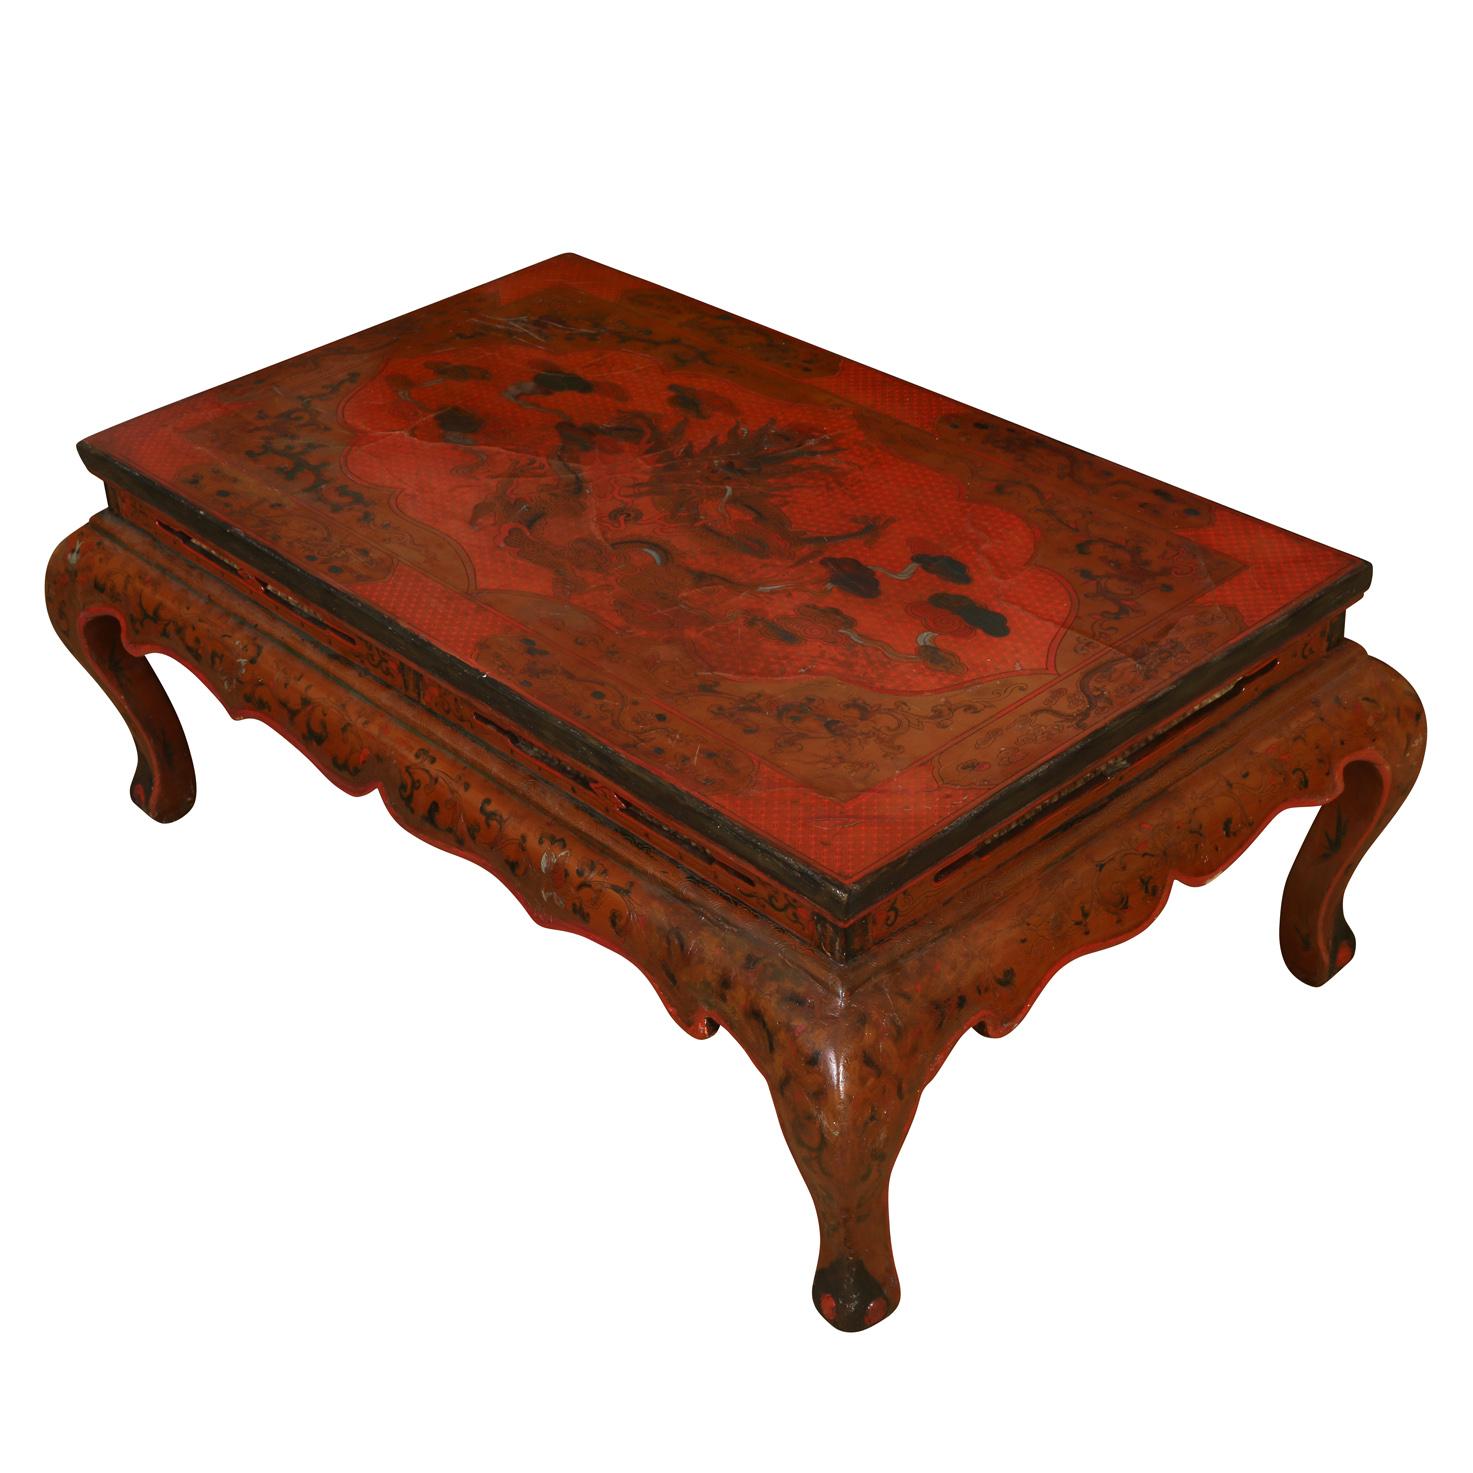 A Chinese red coromandel lacquer coffee table with a dragon motif to top and curved legs and apron.